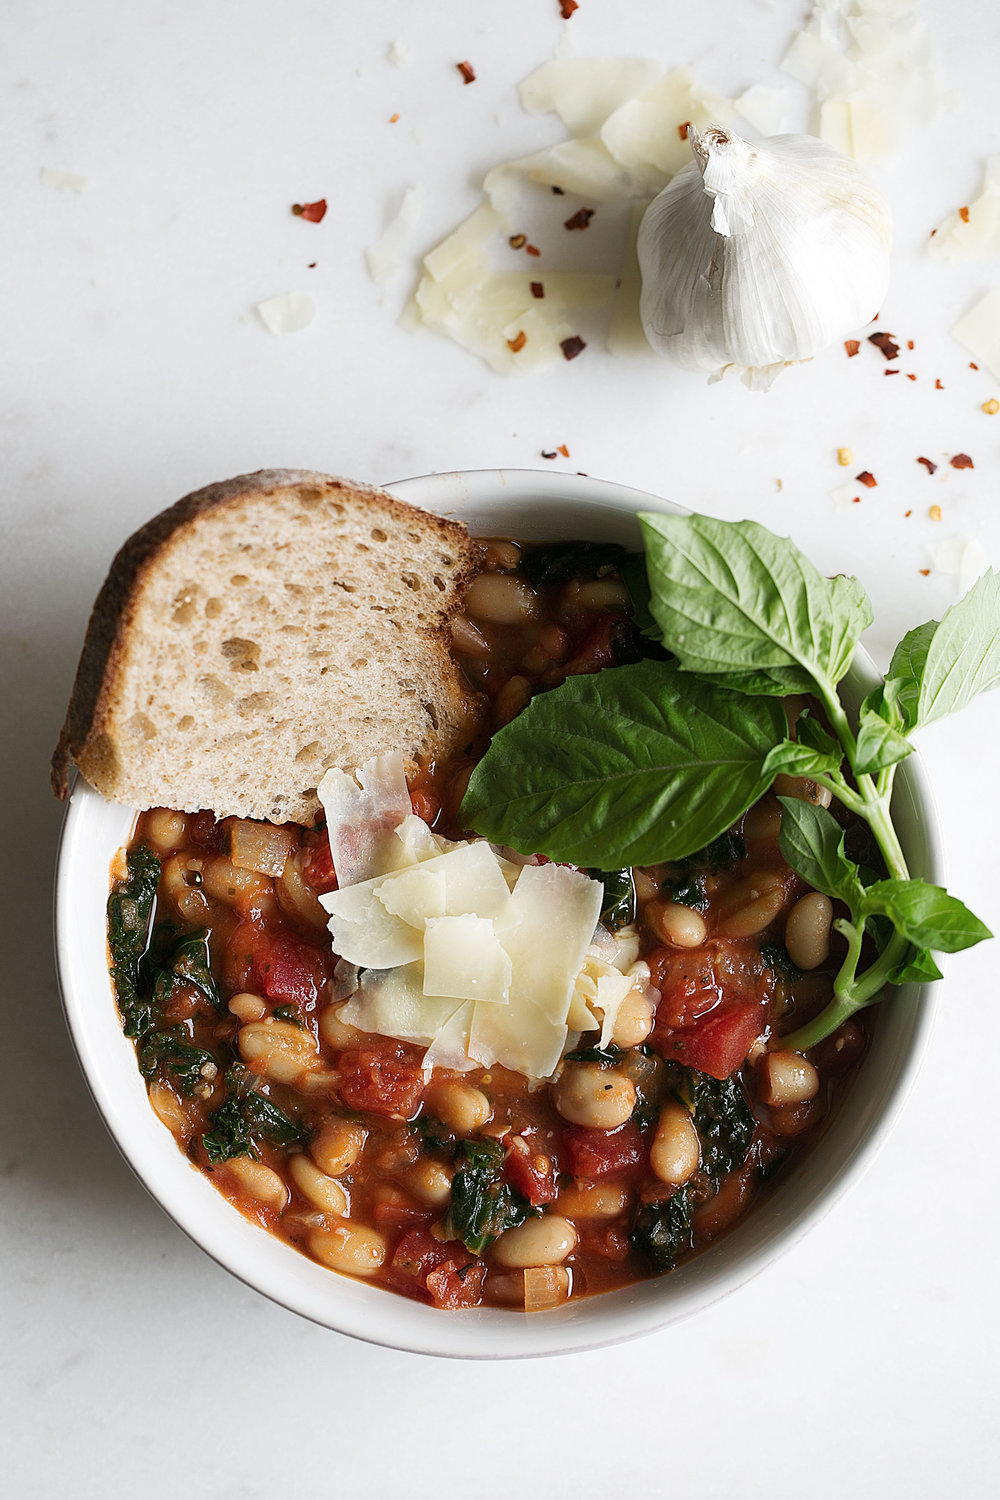 white bean and kale soup with bread and basil leaves